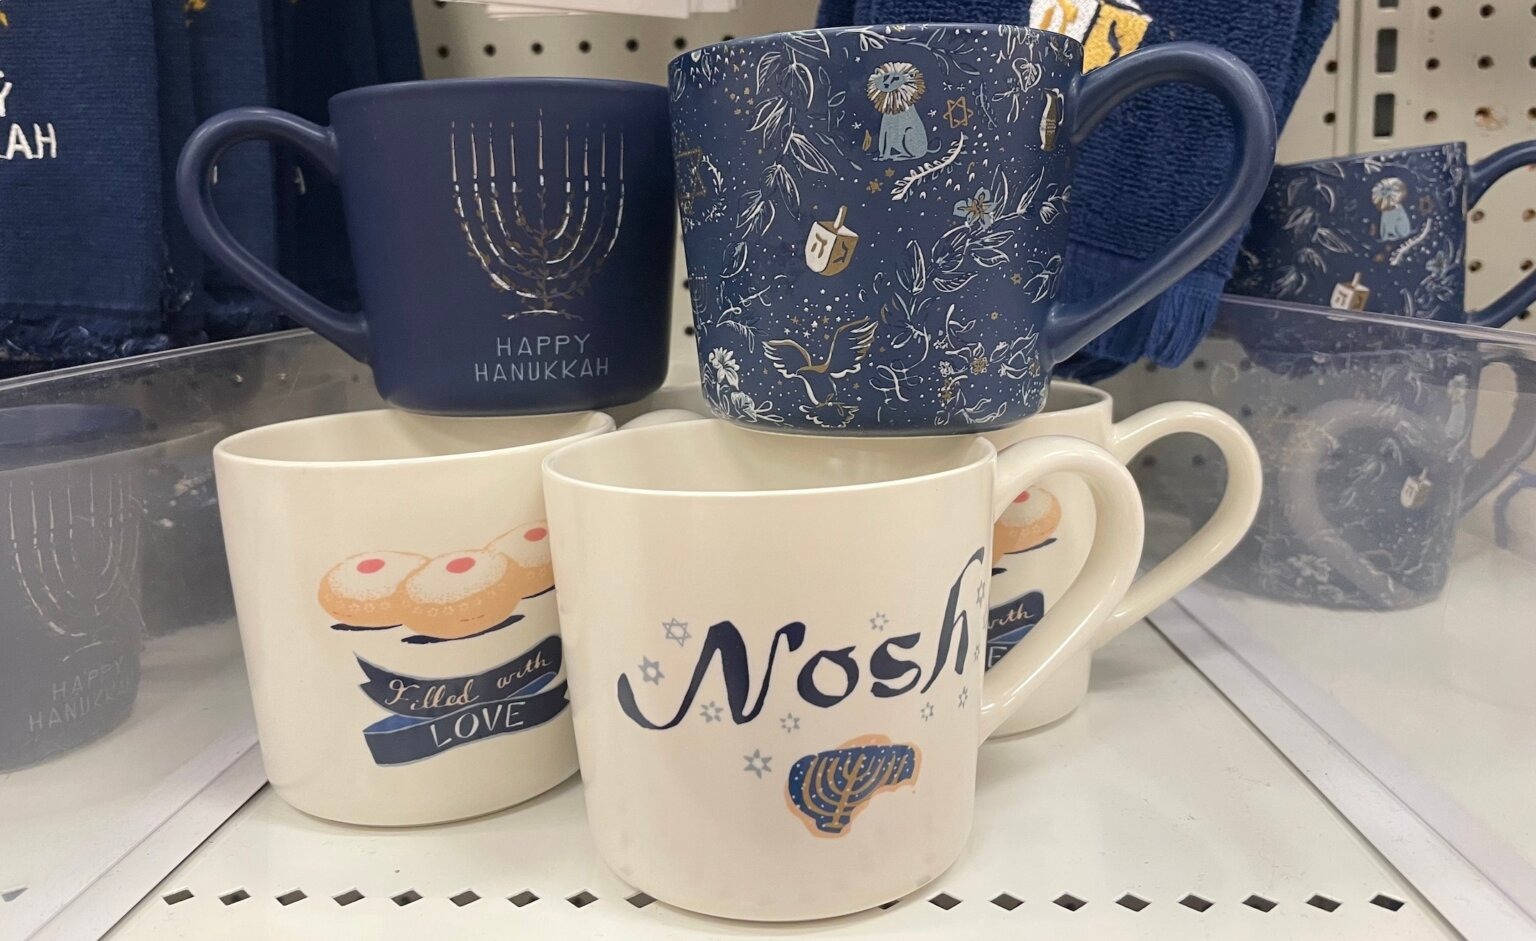 Target’s array of Hanukkah mugs represent a small swath of the retailer’s 2022 collection. (Philissa Cramer)